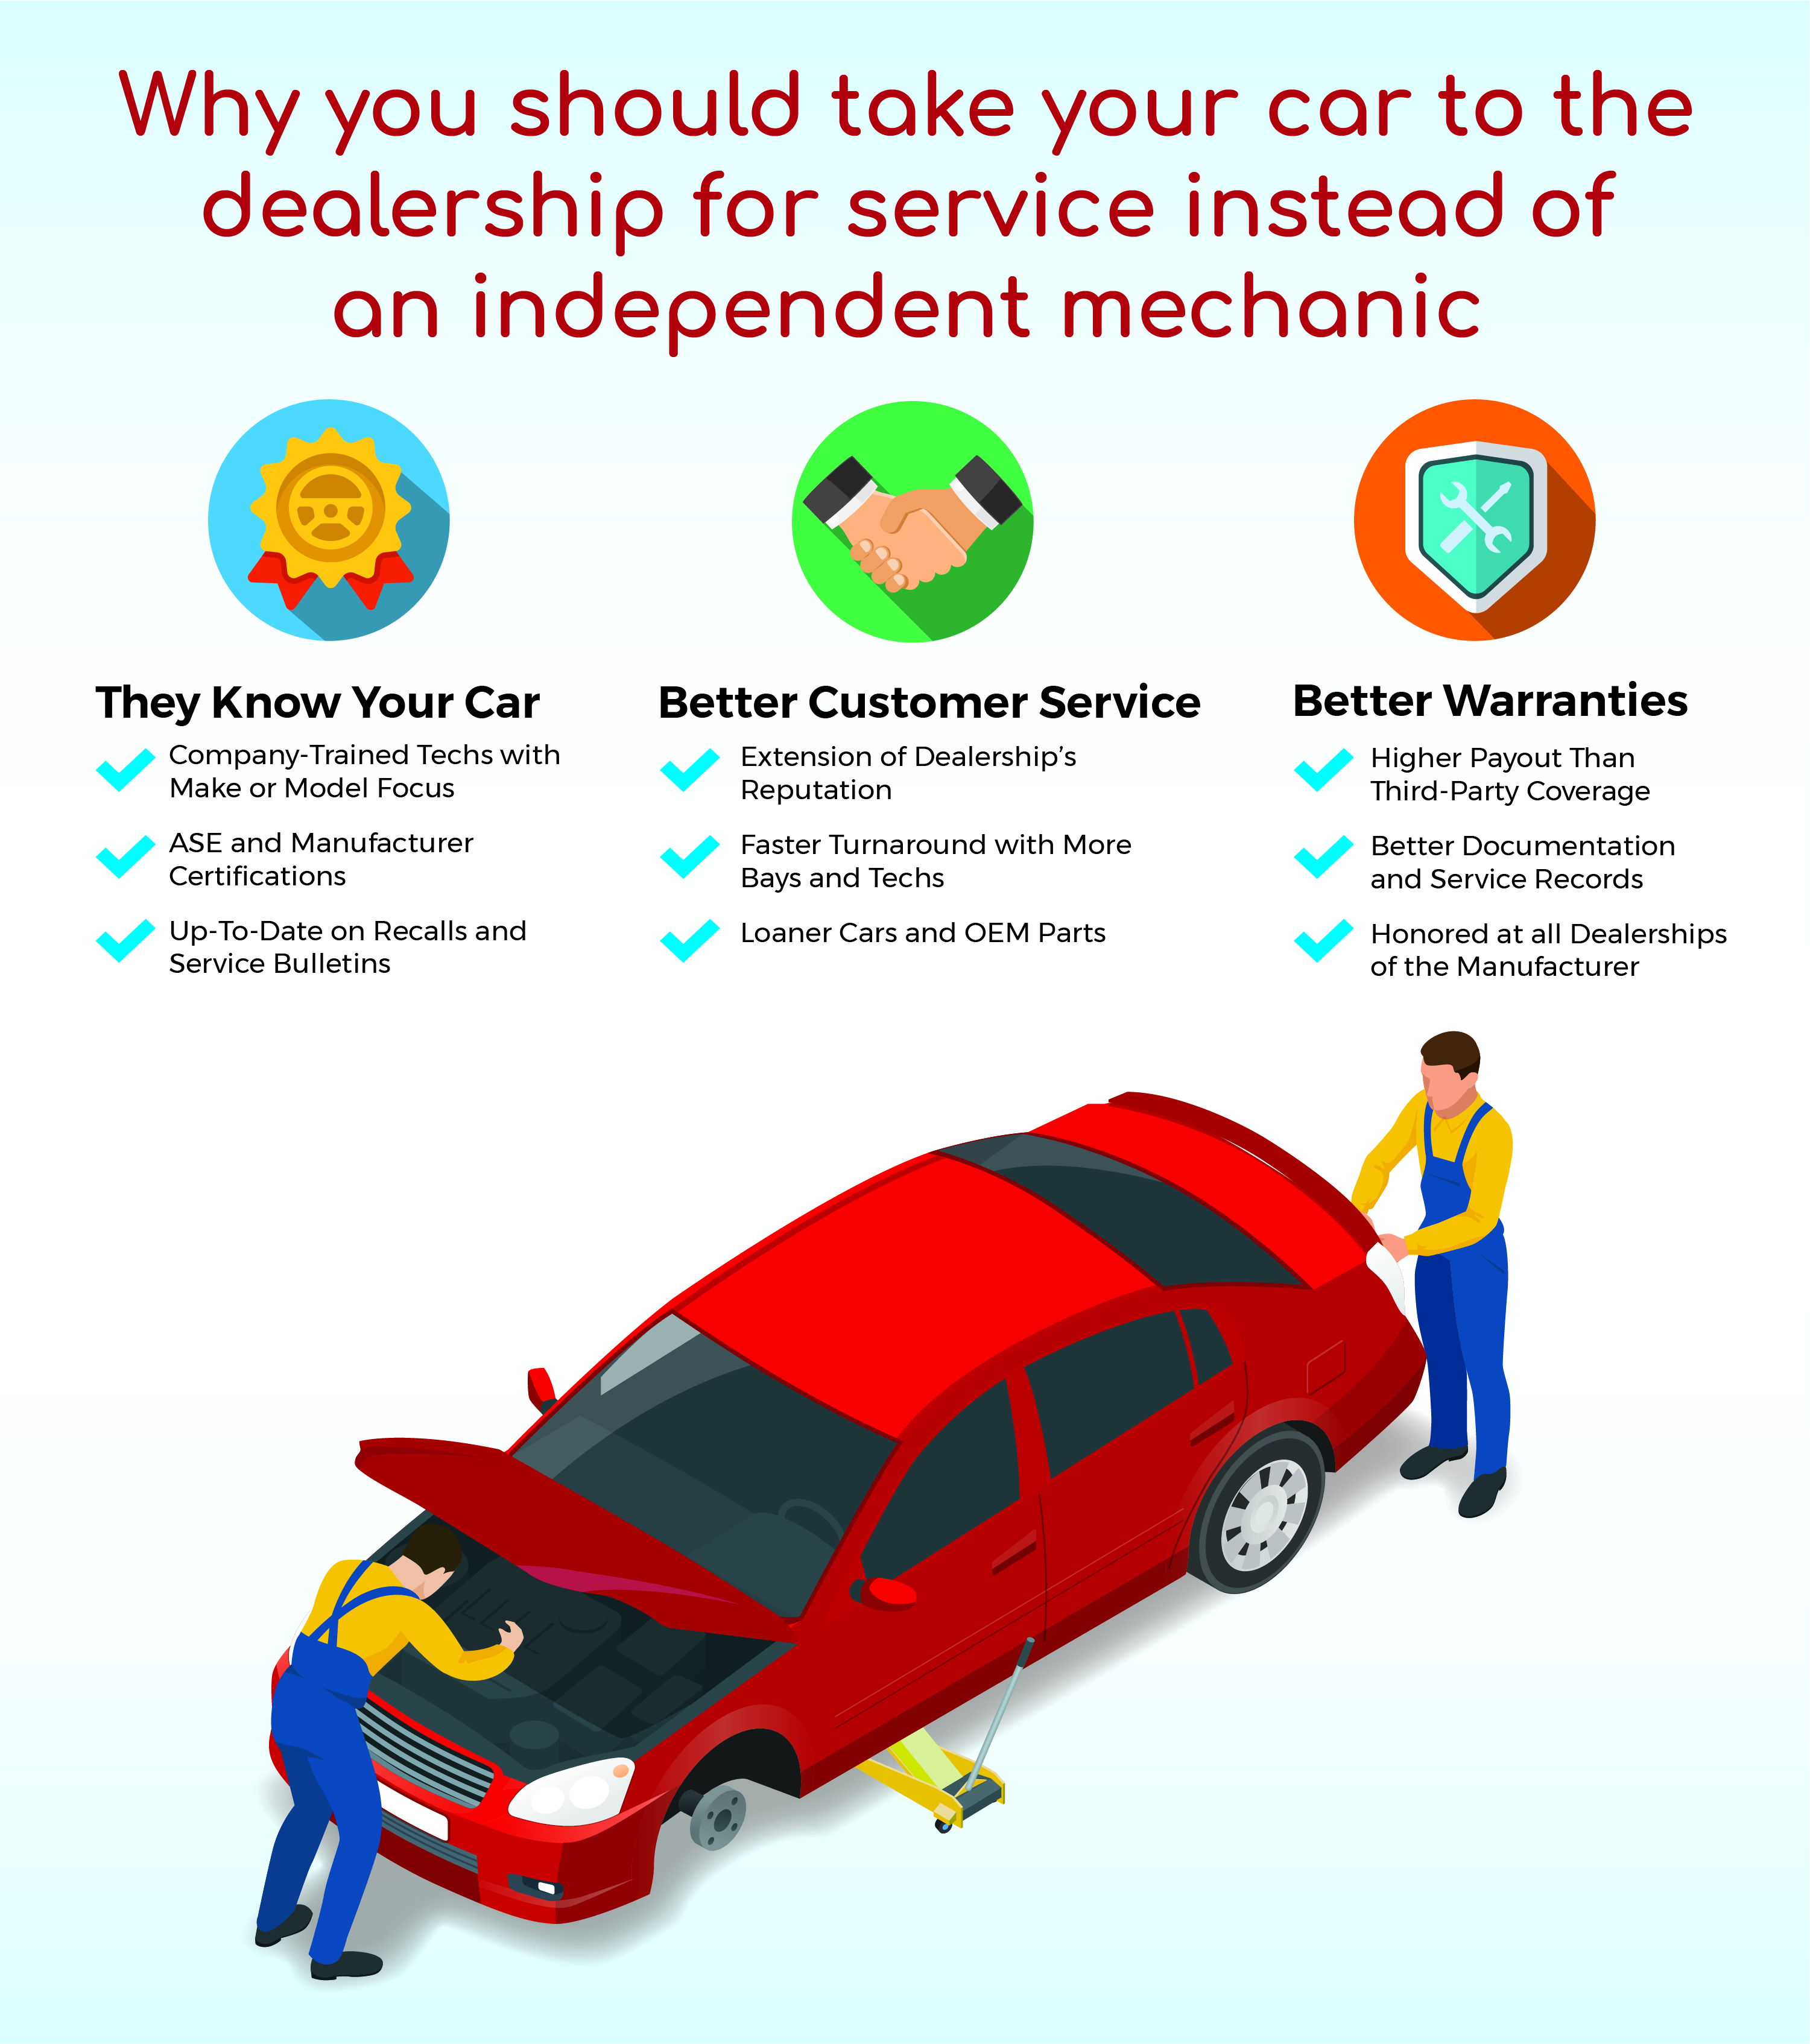 Why the Dealership Beats a Mechanic for Service